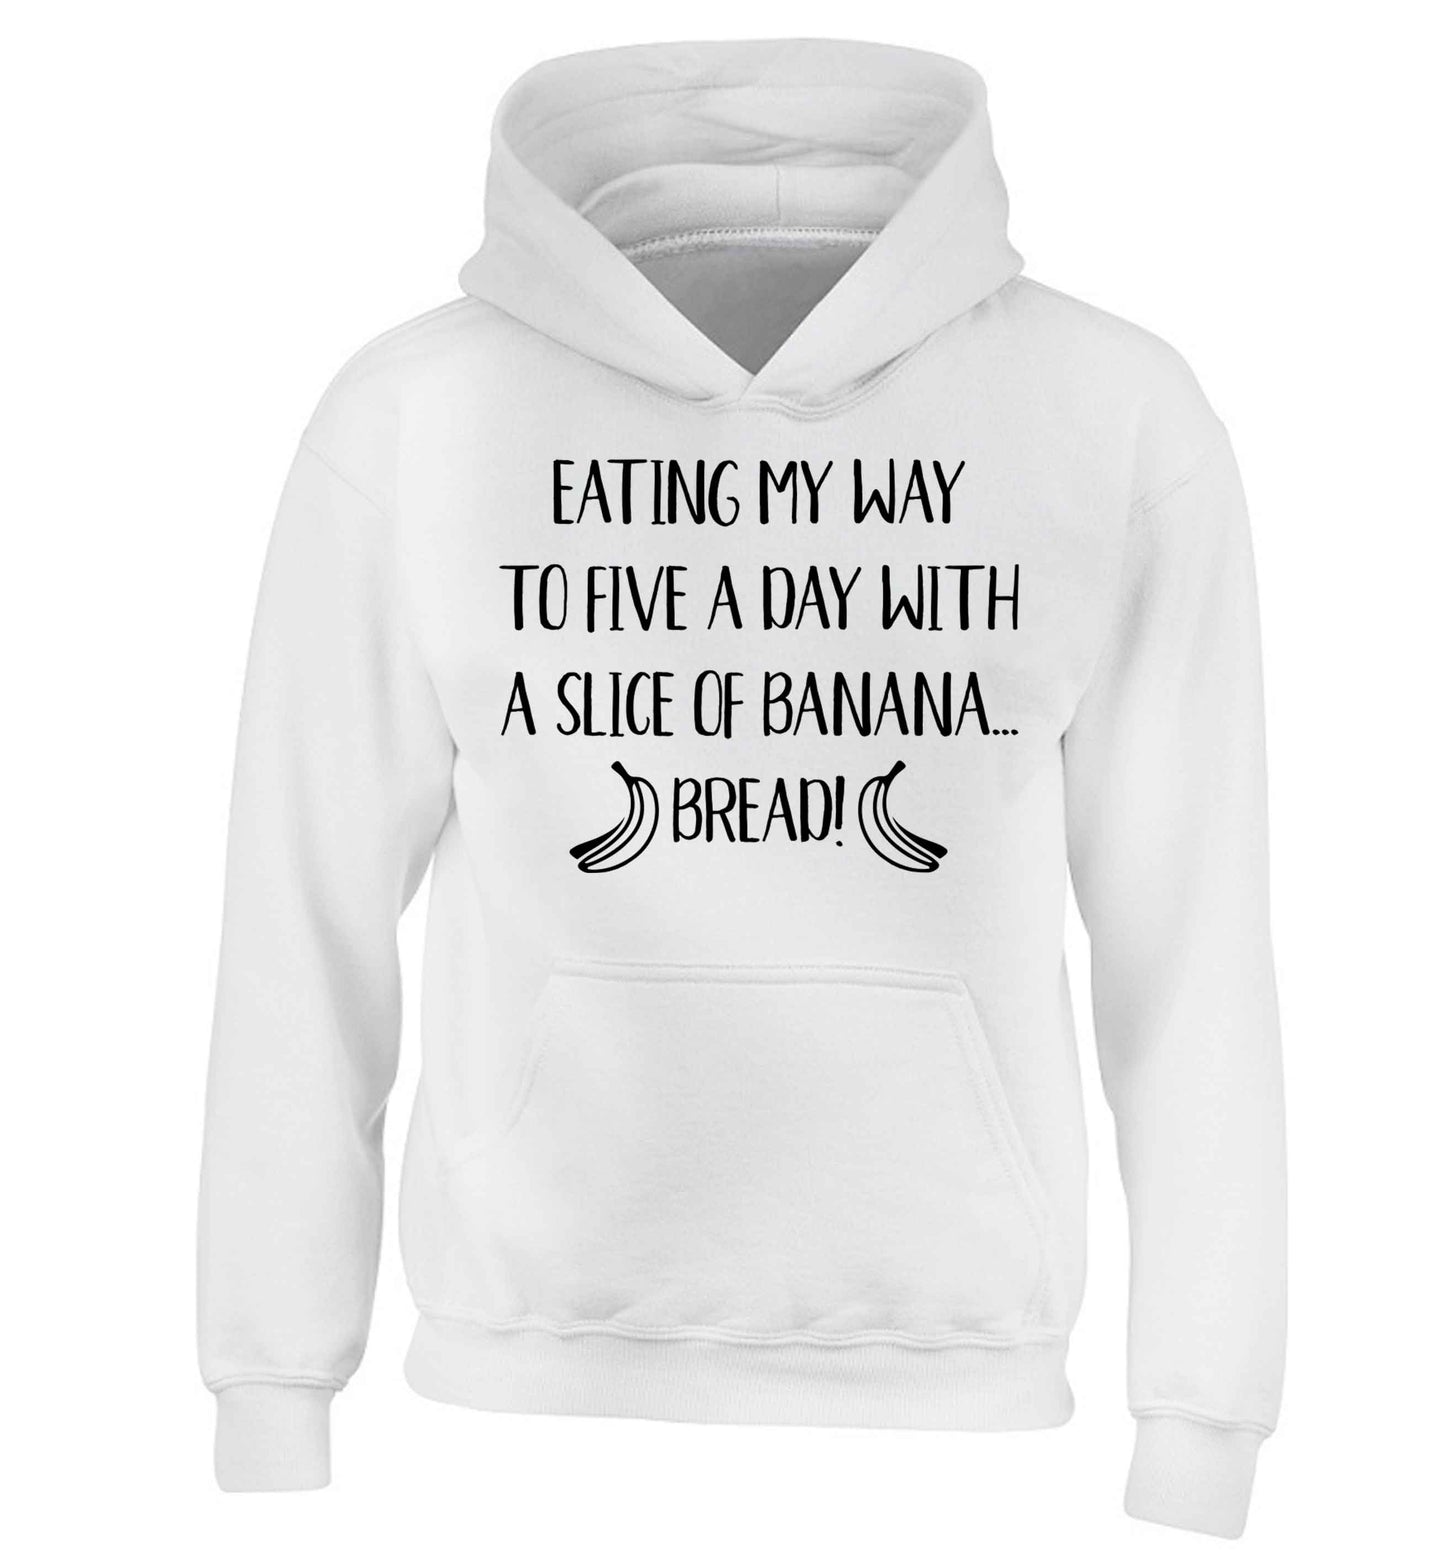 Eating my way to five a day with a slice of banana bread children's white hoodie 12-13 Years